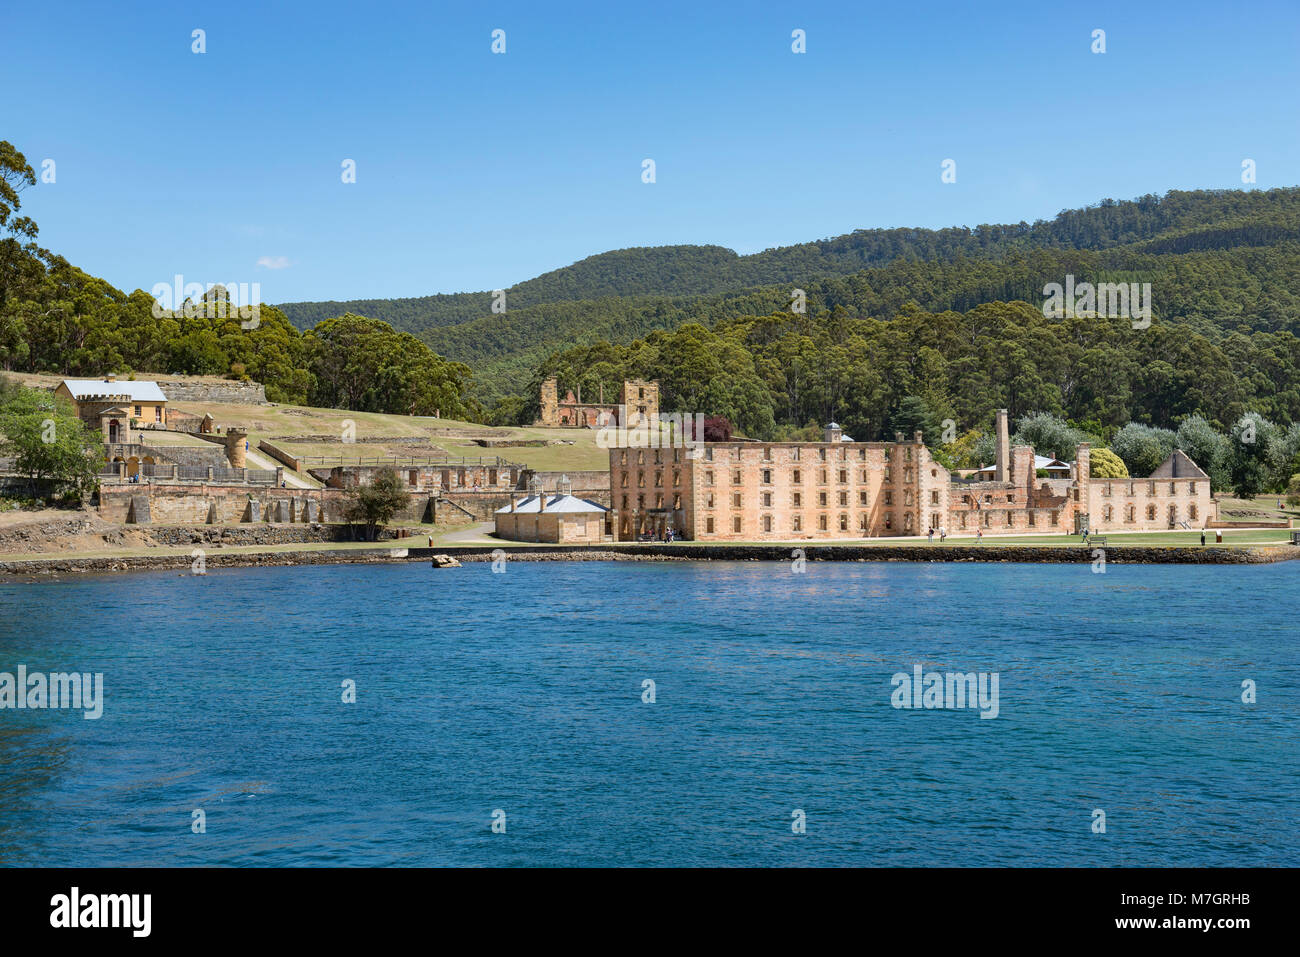 Port Arthur Historic Site in Tasmania is the best preserved convict site in Australia. View of the Penitentiary overlooking Mason Cove. Stock Photo